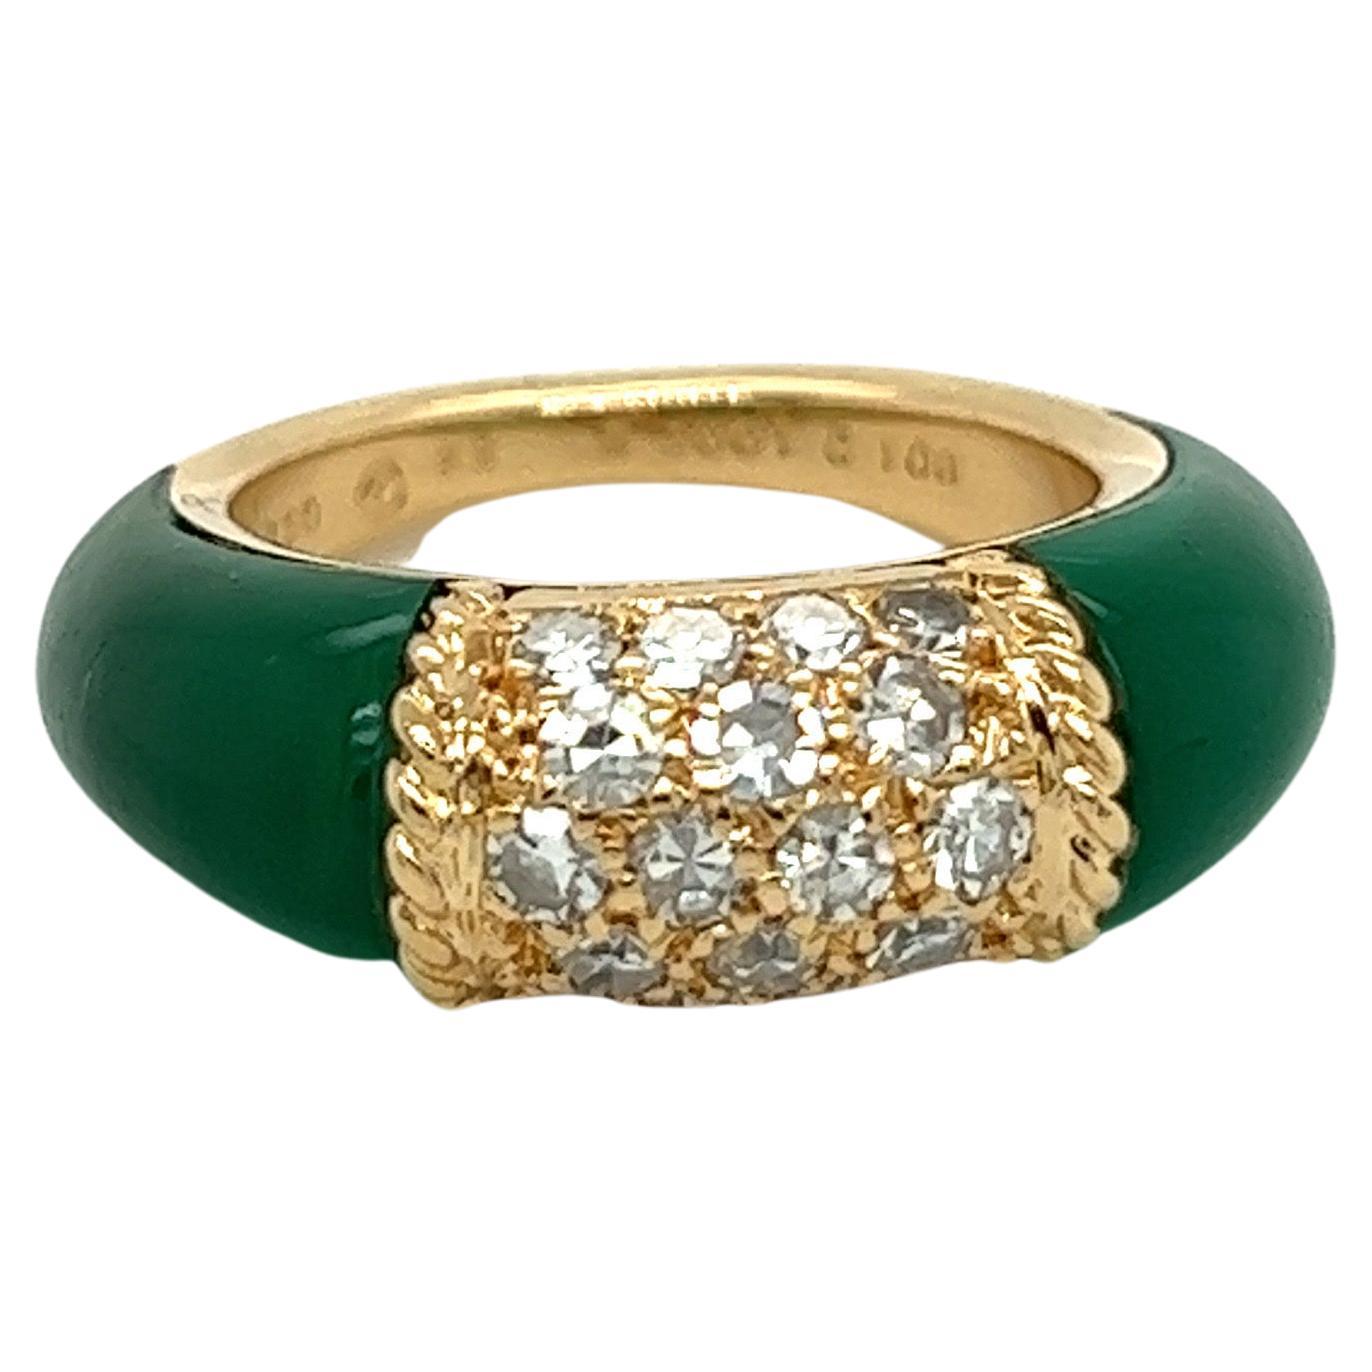  Rare Van Cleef & Arpels Chrysoprase and Diamond Ring Set in 18ct Yellow Gold For Sale